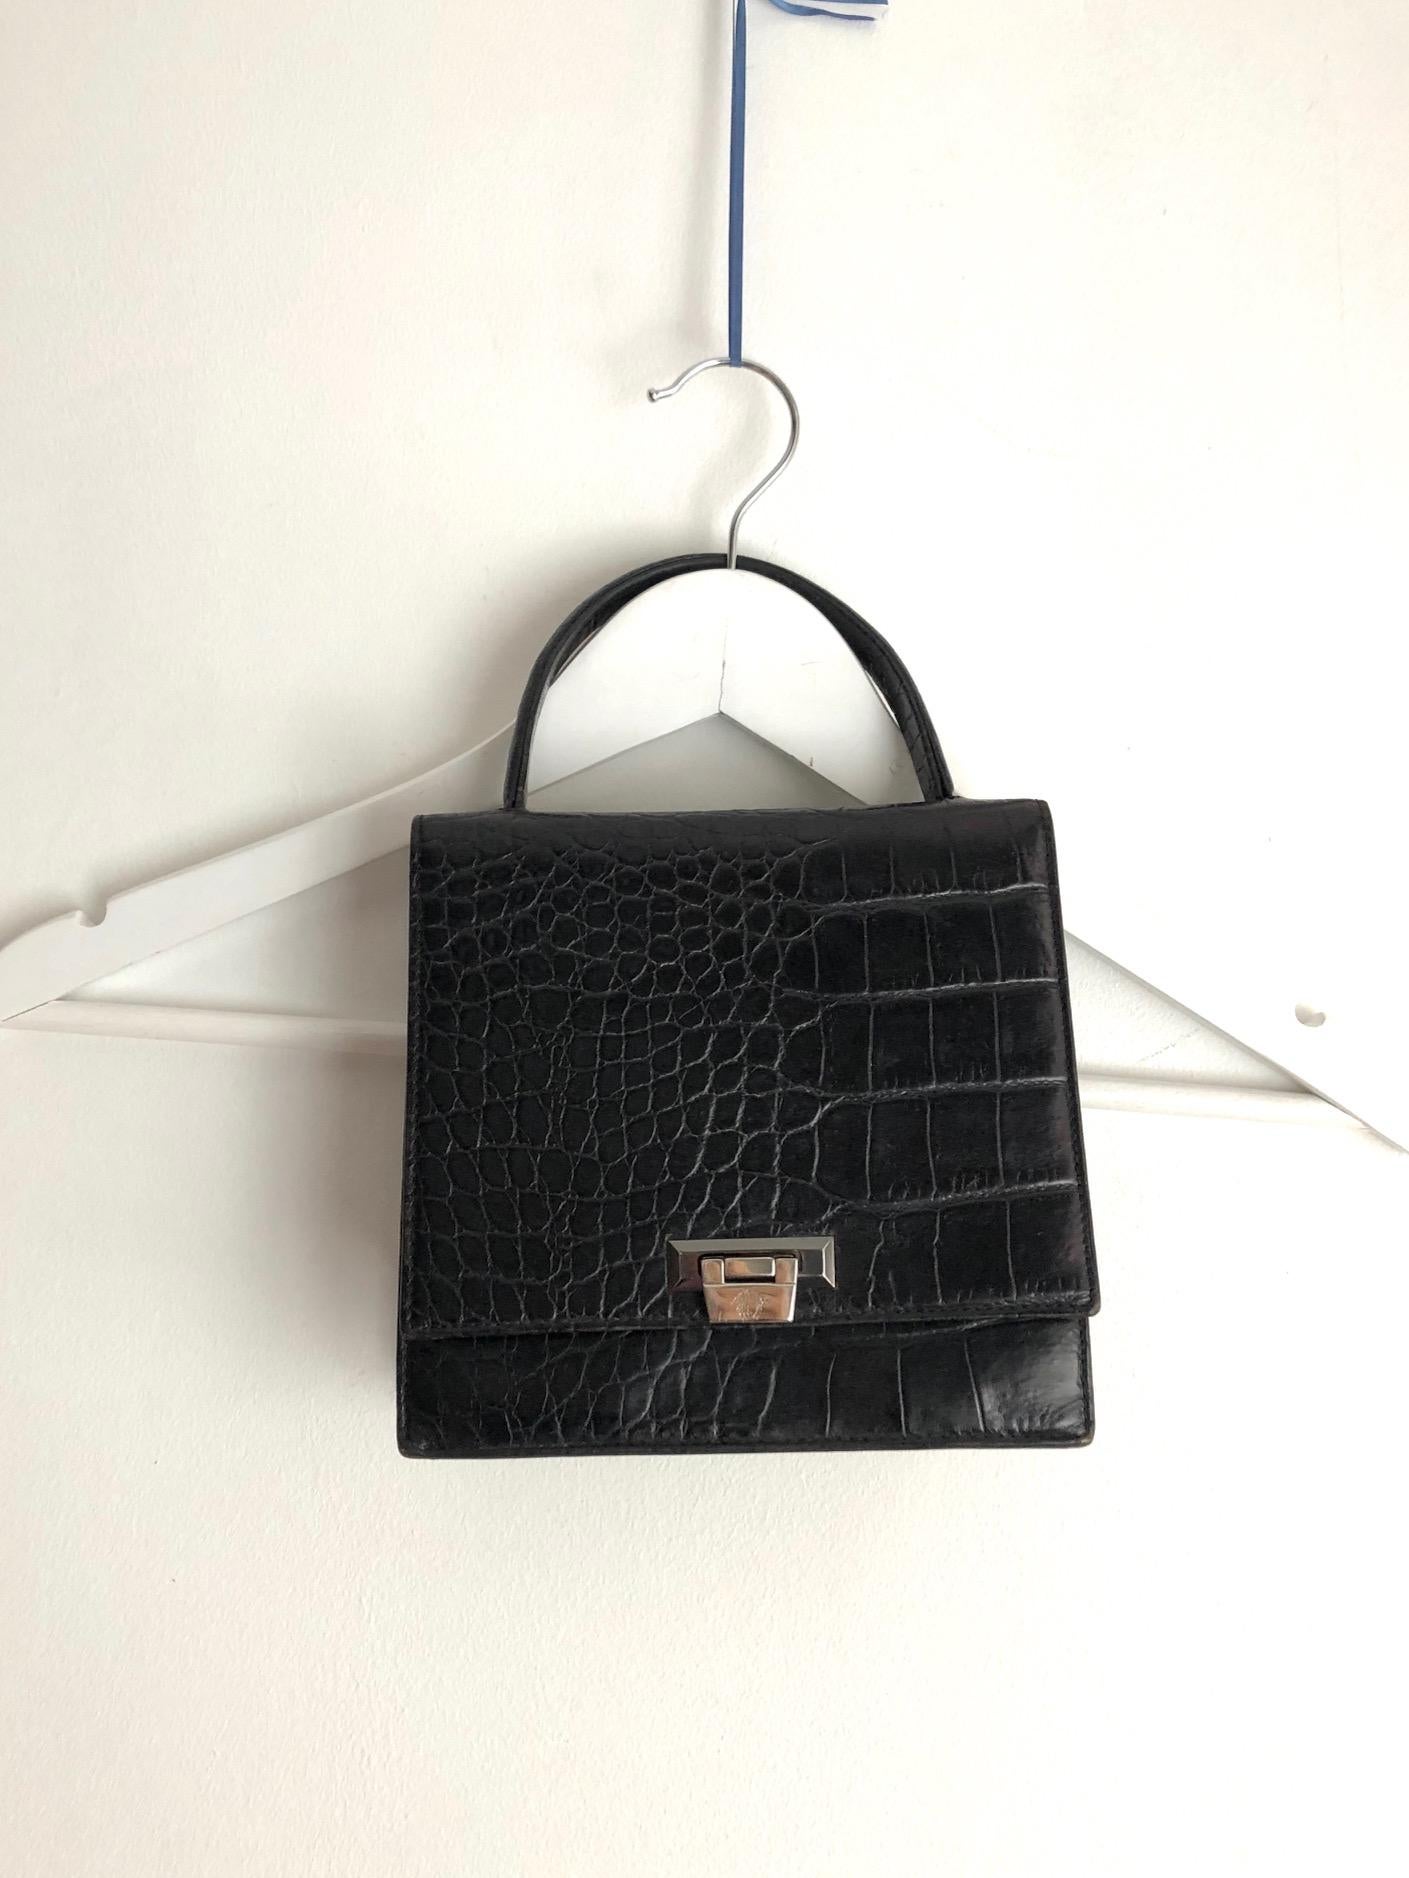 FREE UK and WORLDWIDE DELIVERY 

Gianni Versace black crocodile print leather clutch tote mini bag in like new condition, medusa emblem on silver ware clutch closure, flap front, 2 internal compartments, inside pocket
Condition: vintage, 1990s, very